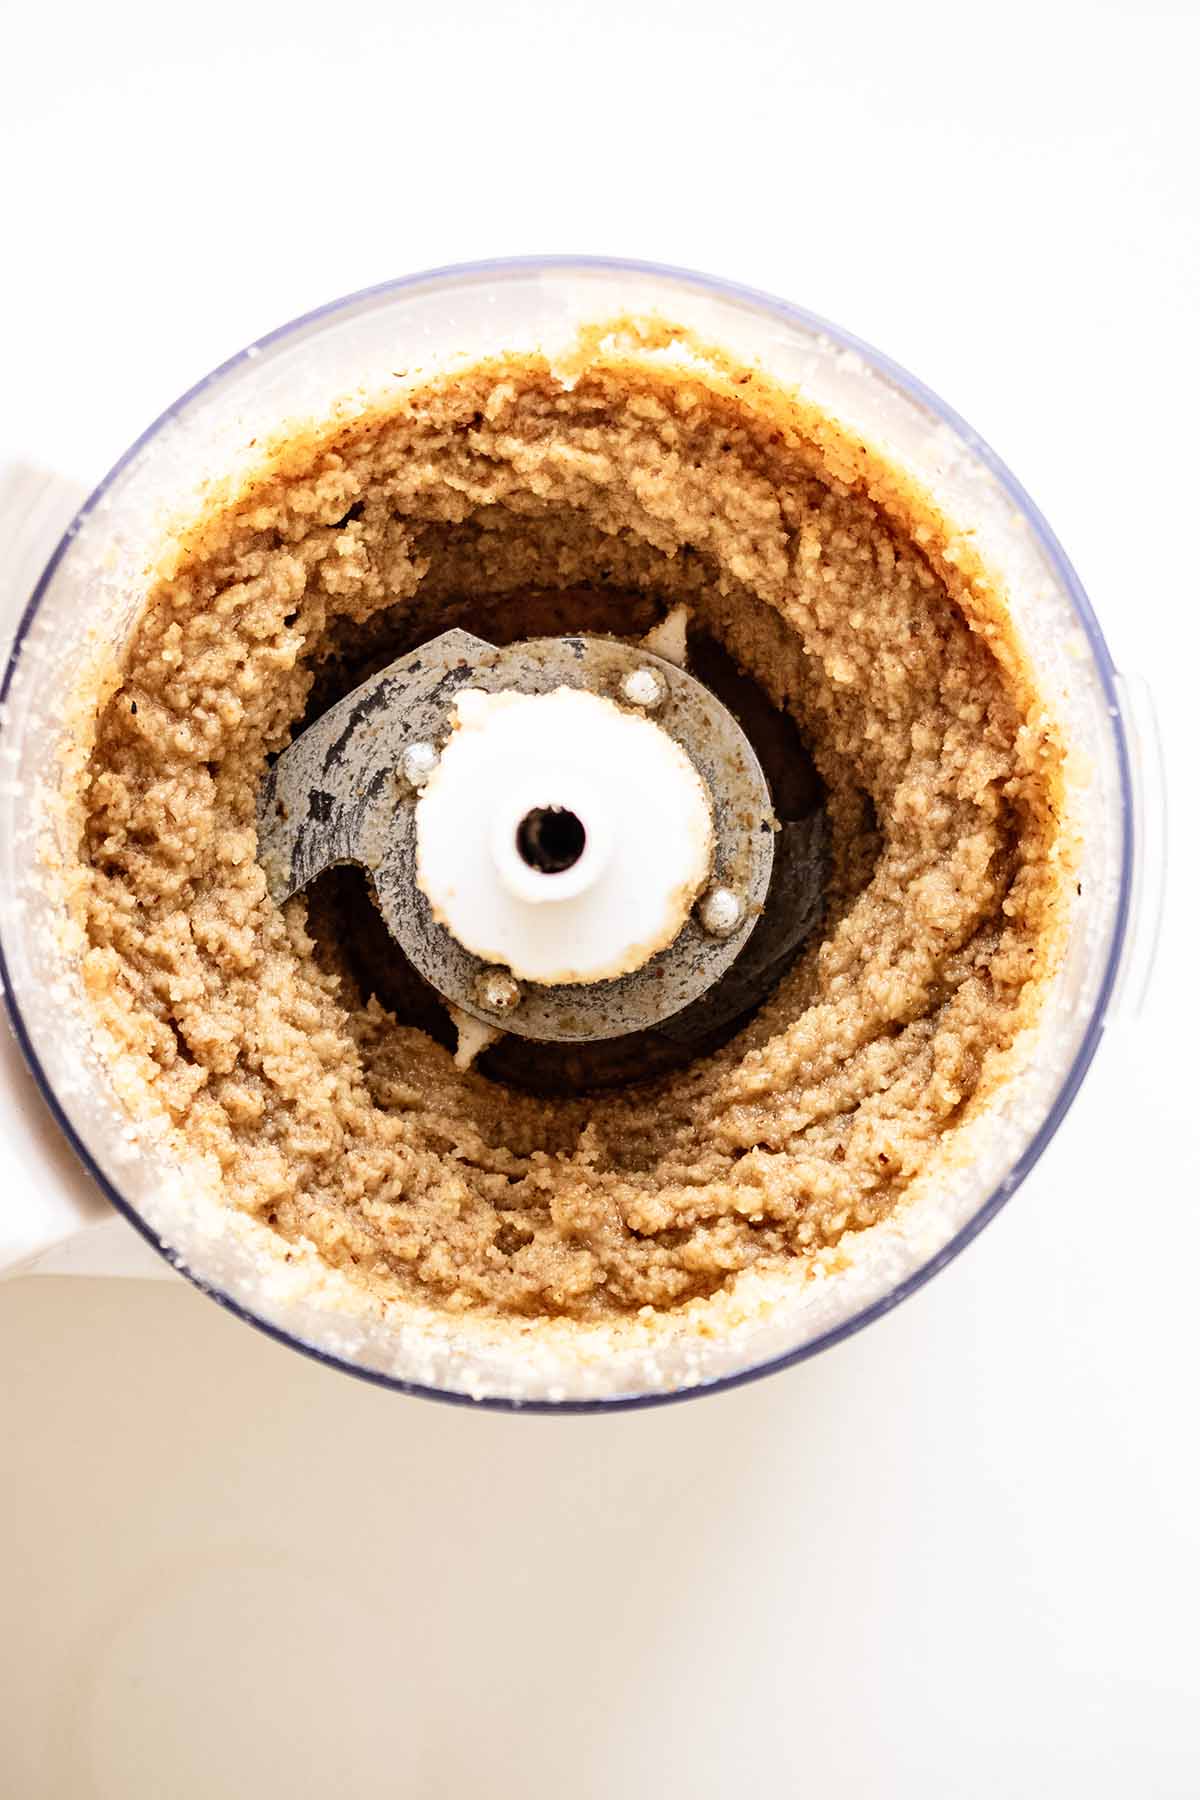 Overhead view of homemade nut butter in a food processor